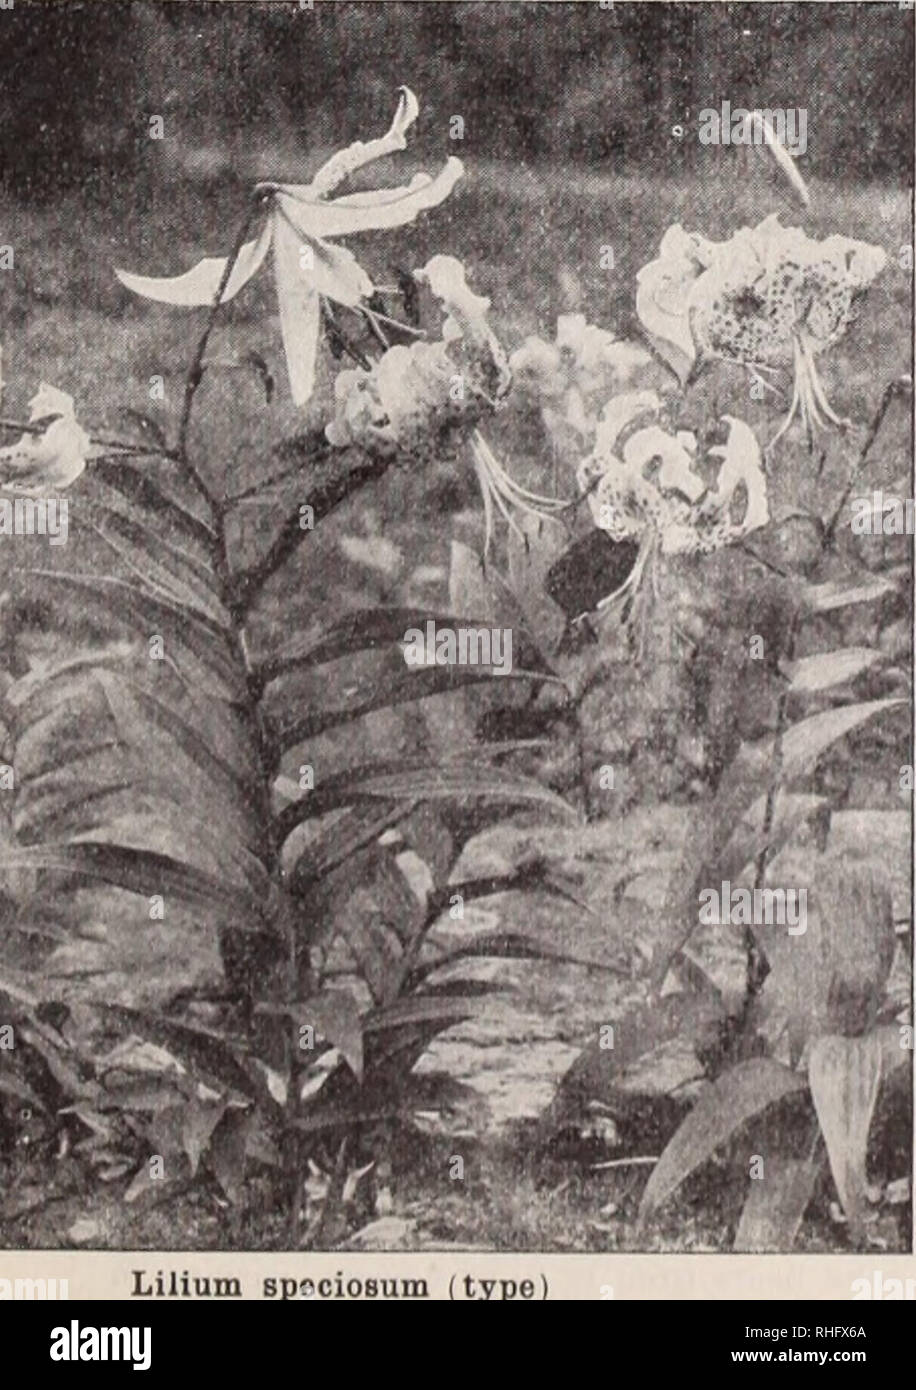 . Boddington's quality bulbs, seeds and plants / Arthur T. Boddington.. Nursery Catalogue. Doz. $4 00 $30 00 3 50 25 00 65 Lilium auratum (type) LILIUM AURATUM PLATYPHYLLUM. Each A very strong and vigorous type of L. am aluni. Flowers of imme' se size, pure ivory white, with a deep golden band through each petal. Mammoth bulbs $0 50 Large bulbs 40 LILIUM AURATUM RUBRUM VITTA- TUM. A uniciue variety; flowers m to i 2 inches across, ivory white, with broad crimson stripe through center of each petal. Large bulbs 160 6 09 45 00 LILIUM AURATUM VIRGINALE ALBUM. The White Lily of Japan. E.xqui- site Stock Photo